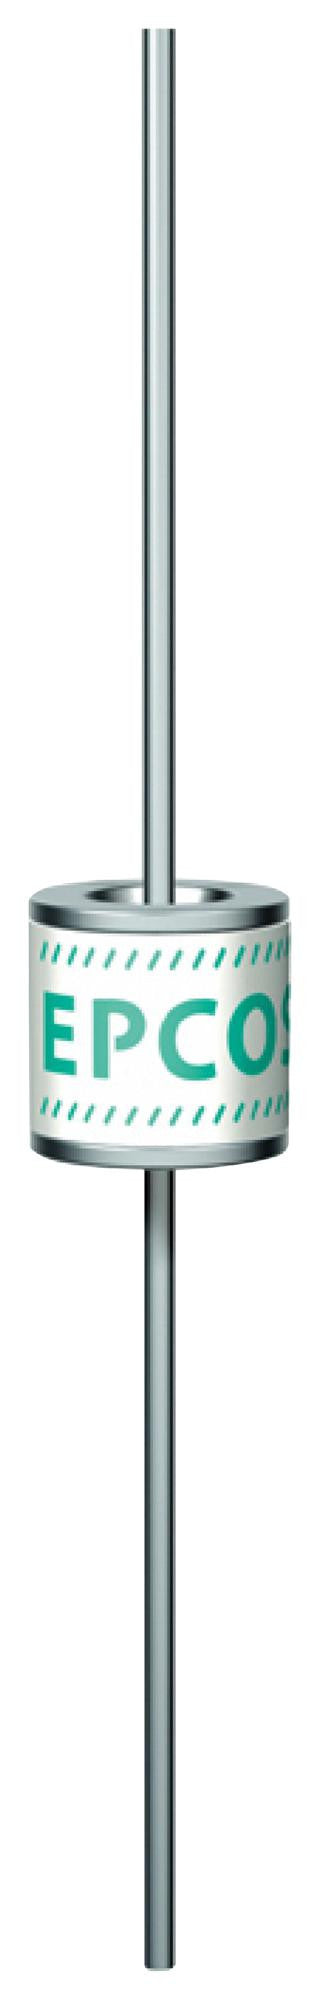 EPCOS B88069X2090S102 Gas Discharge Tube (GDT), A71-H12X Series, 1.2 kV, Axial Leaded, 10 kA, 1.9 kV